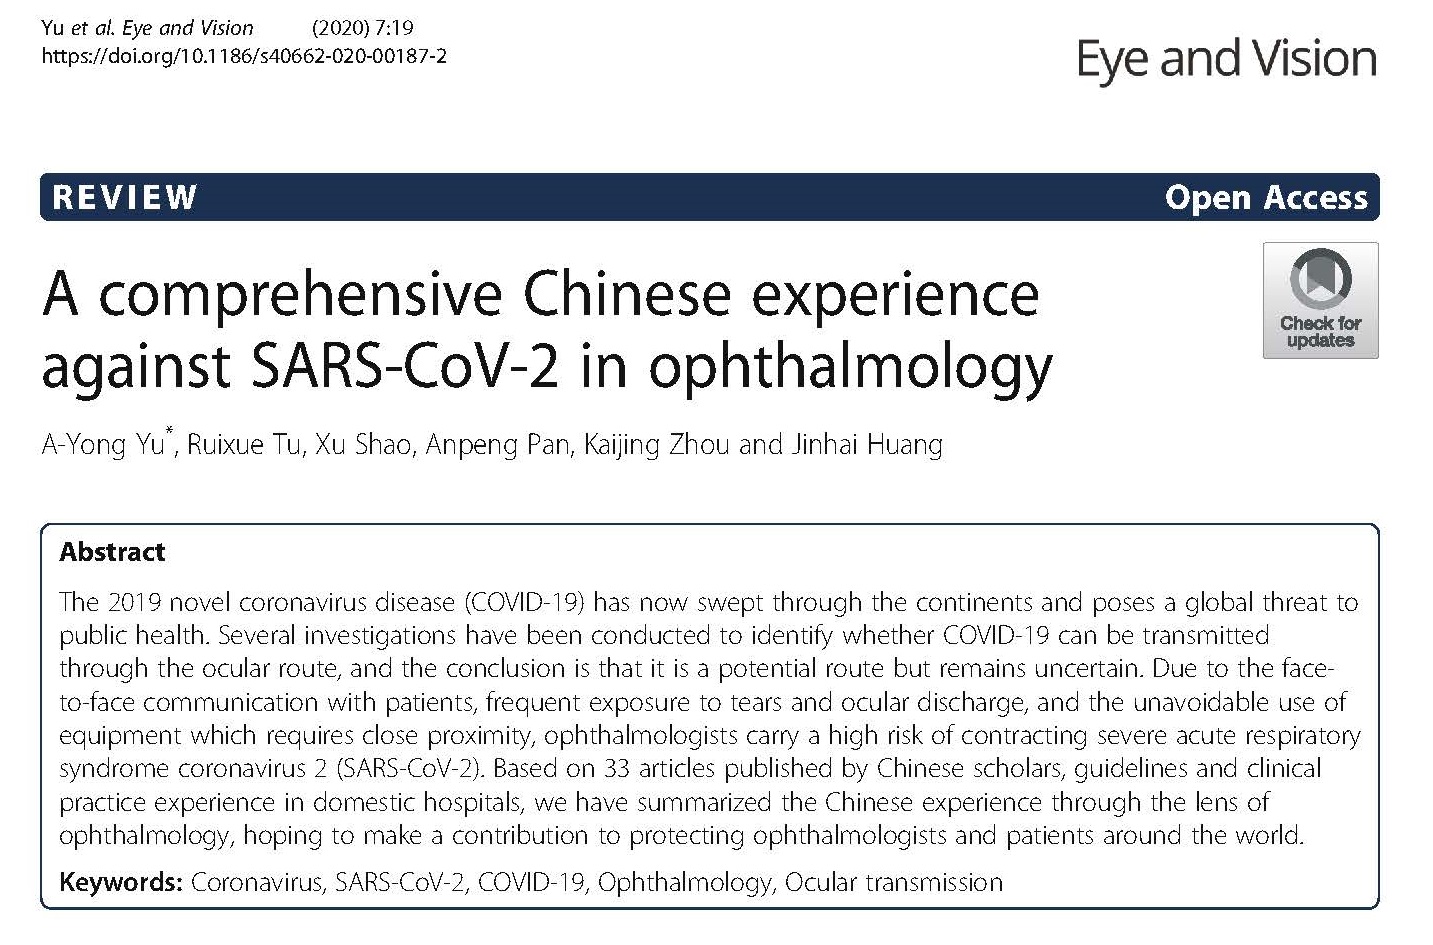 A comprehensive Chinese experience against SARS-CoV-2 in ophthalmology